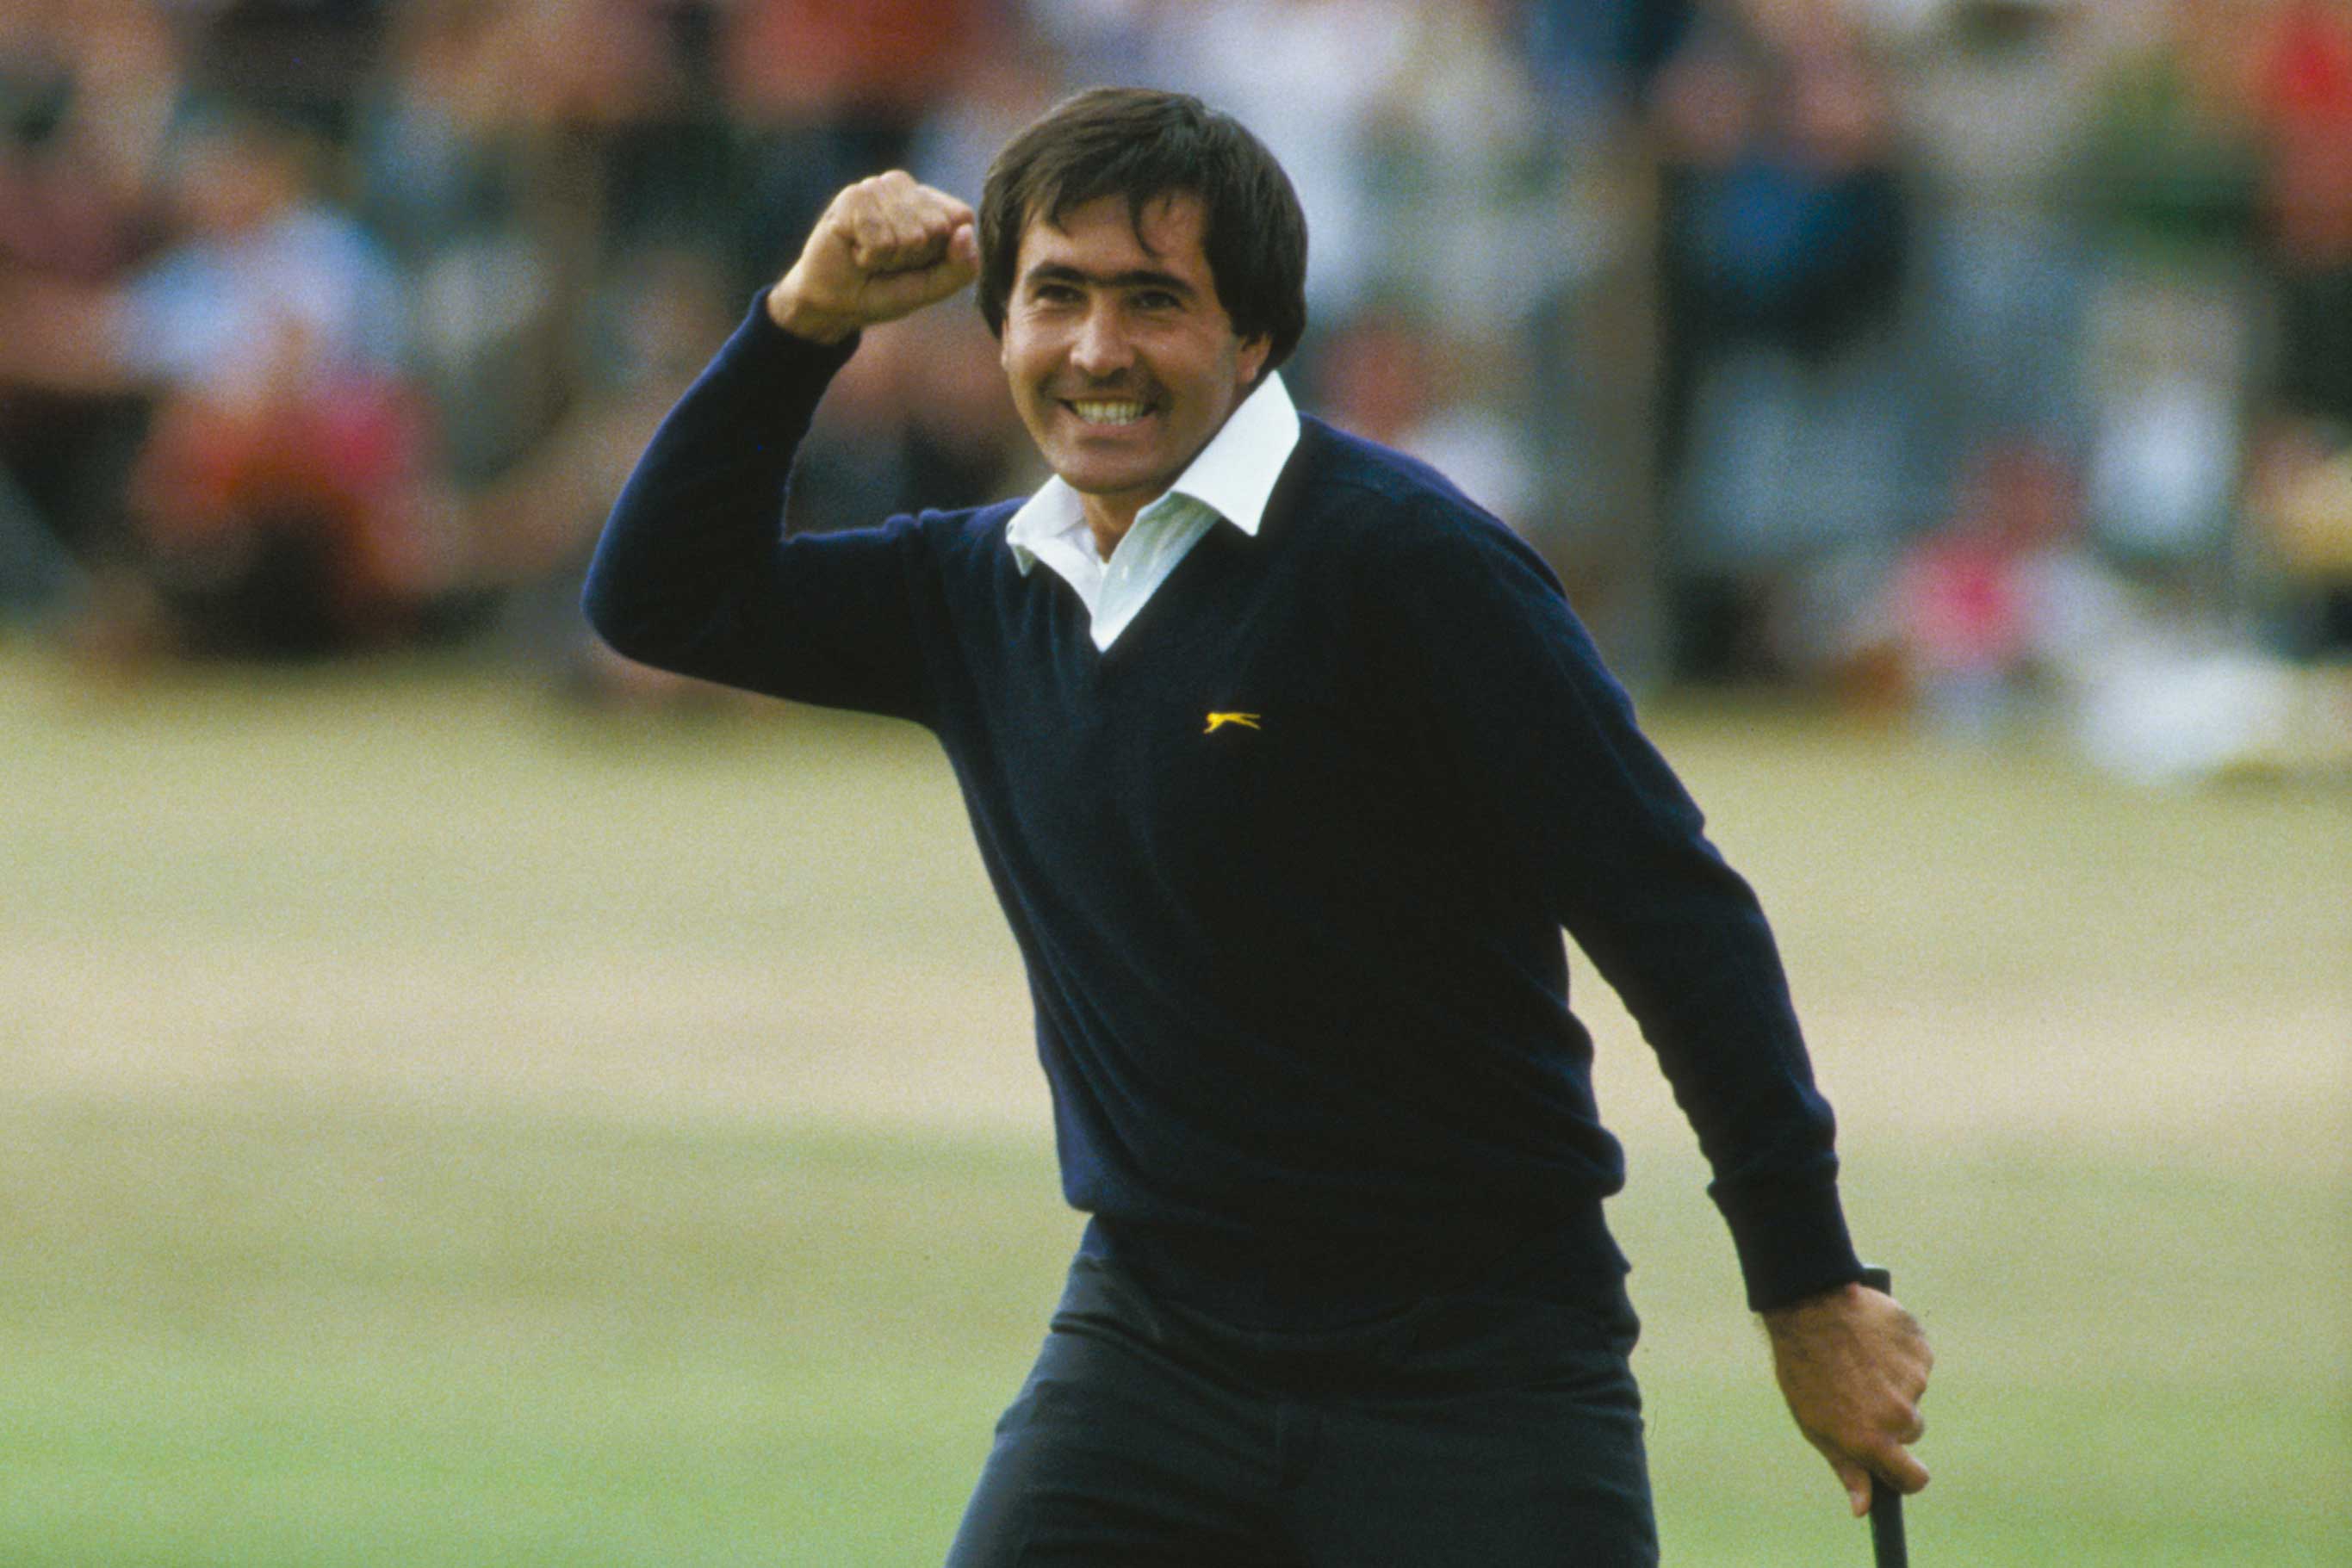 Seve Ballesteros's iconic fist pump after winning the 1984 Open (Photo: Getty Images)